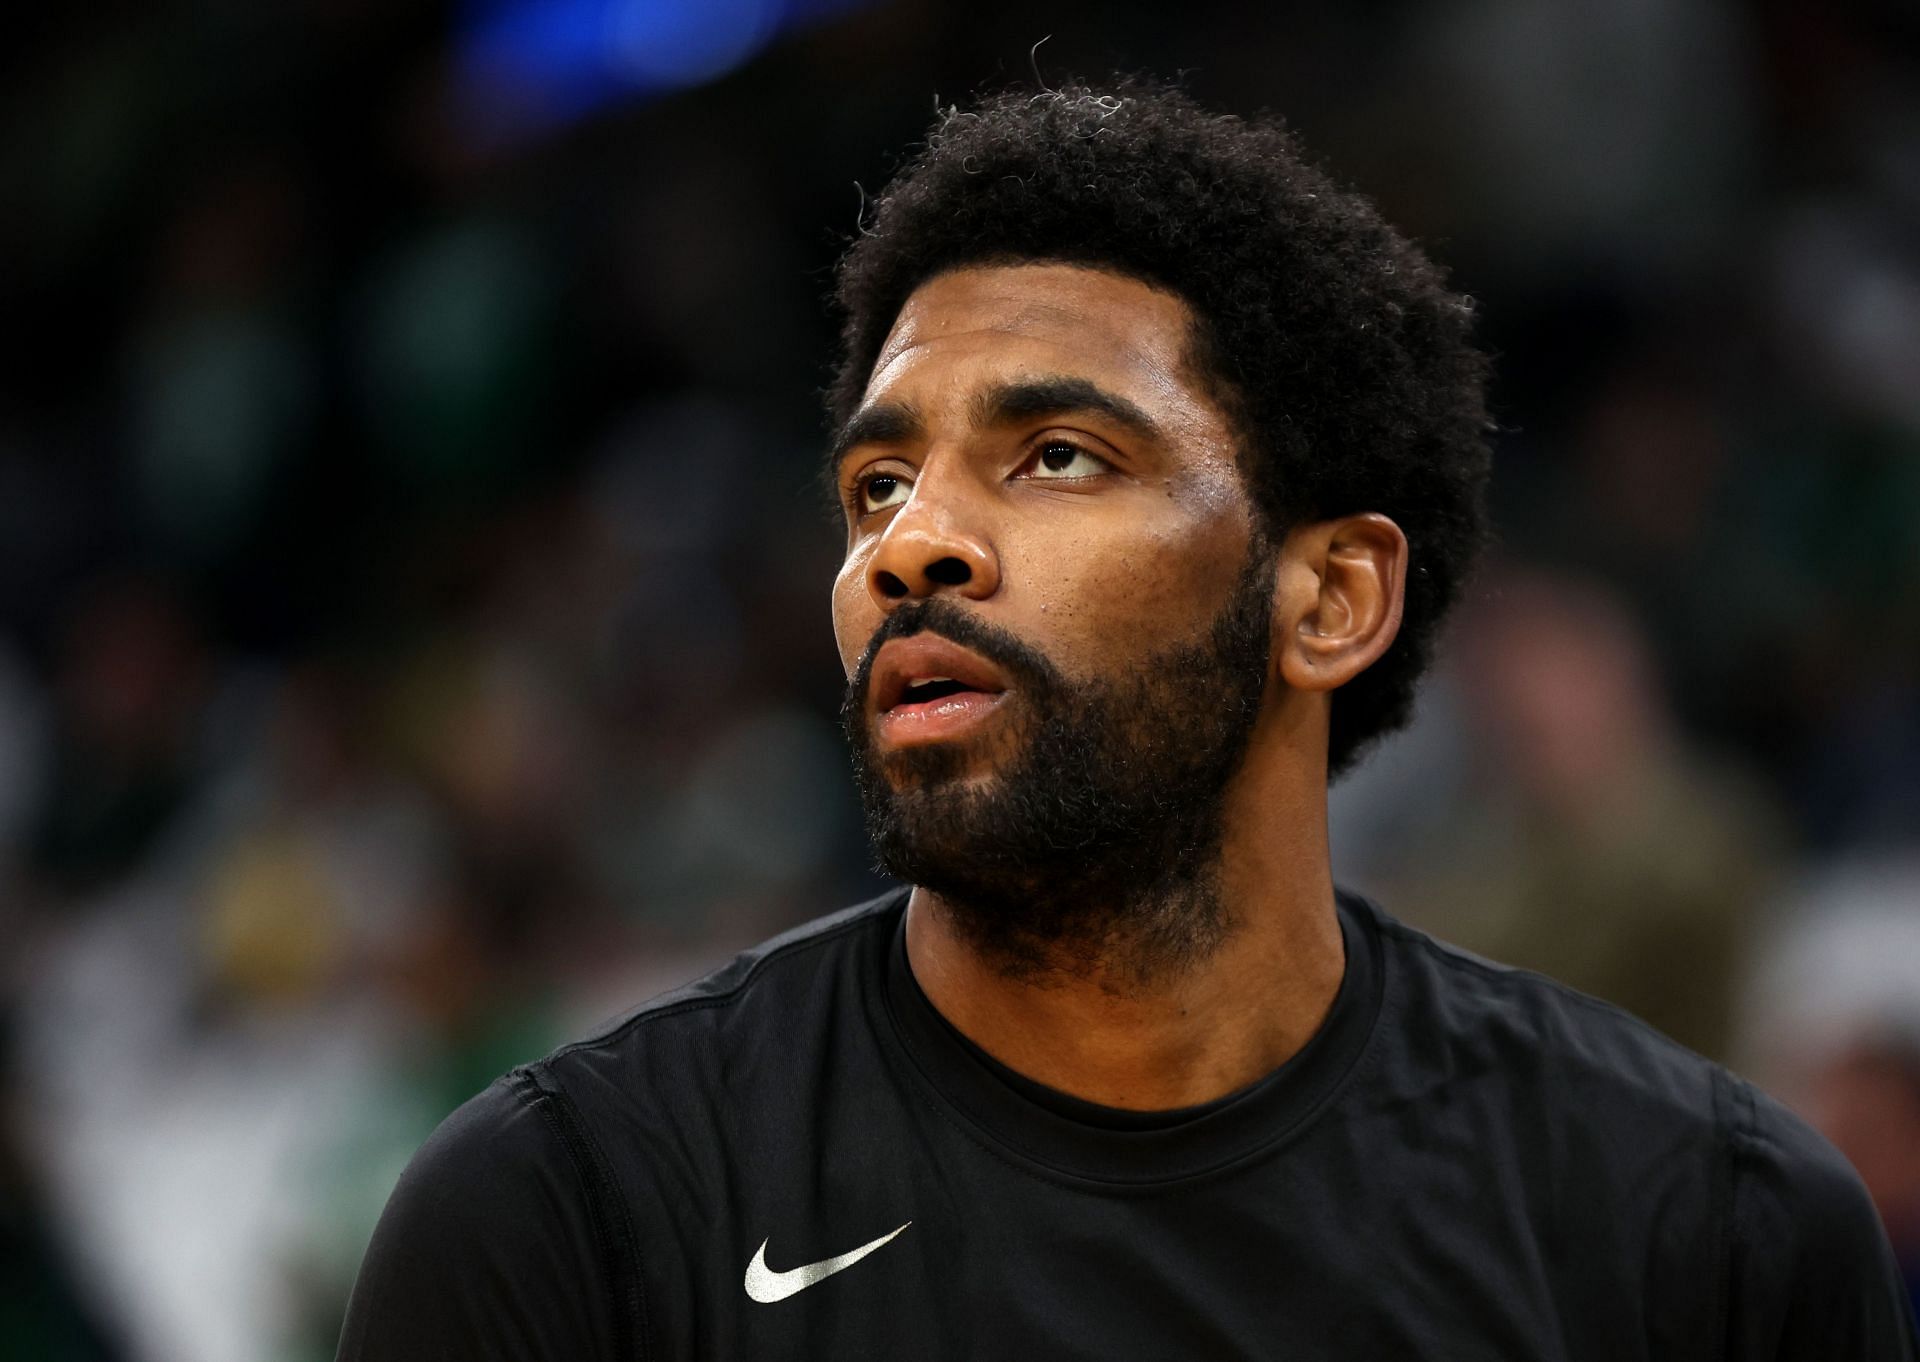 Kyrie recently called out Stephen A. for comments the latter made about his contract situation.